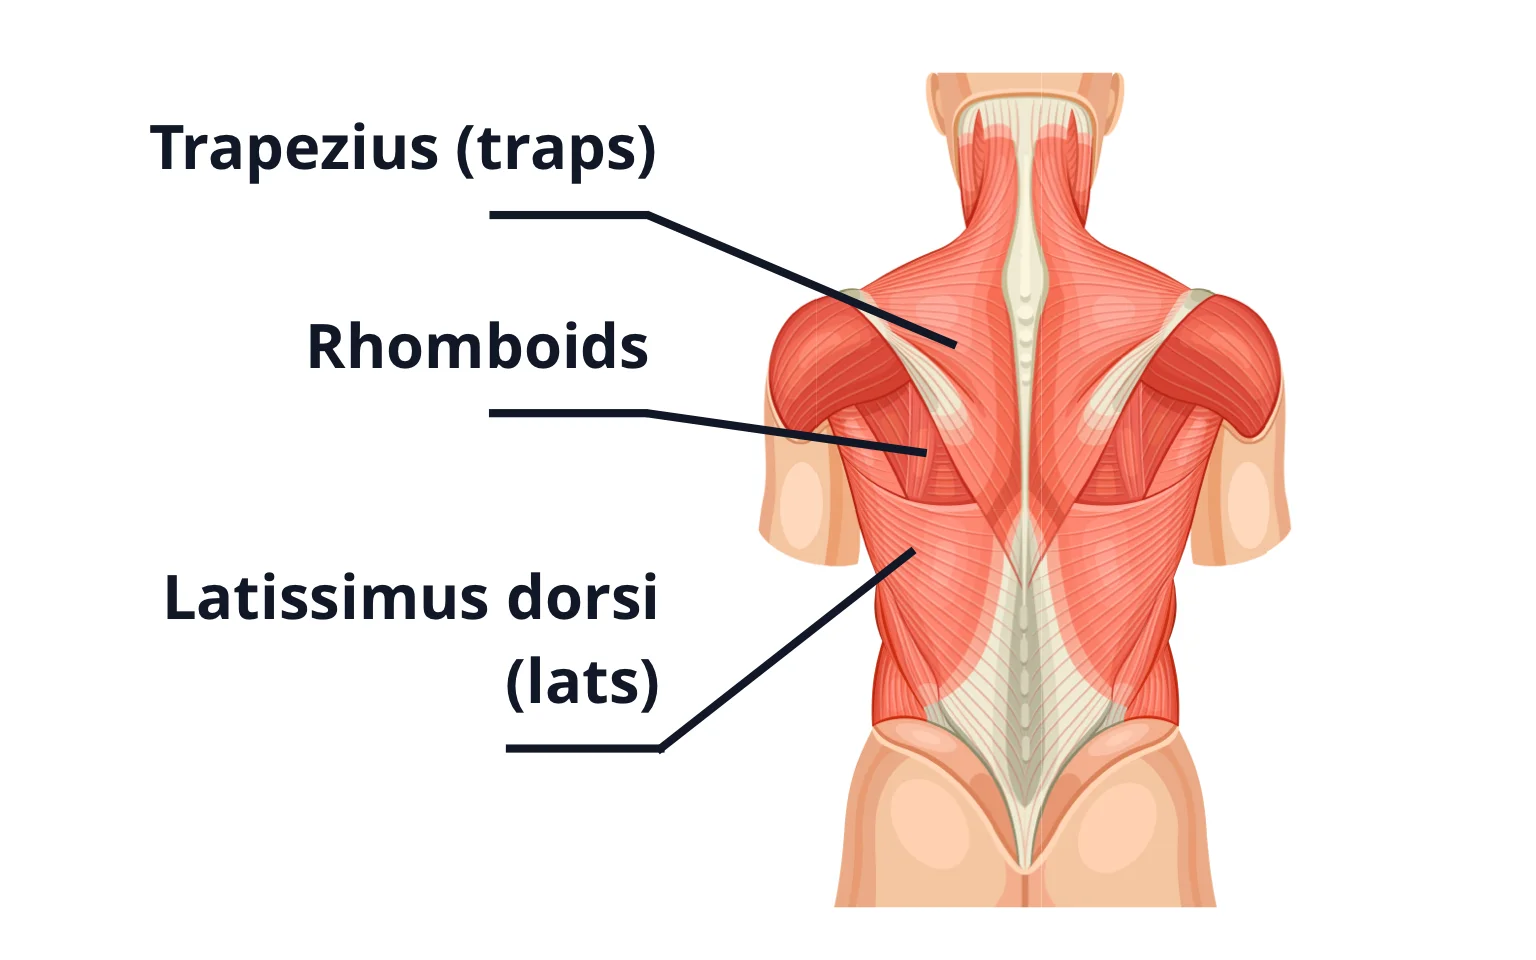 Diagram showing the lats, traps and rhomboids